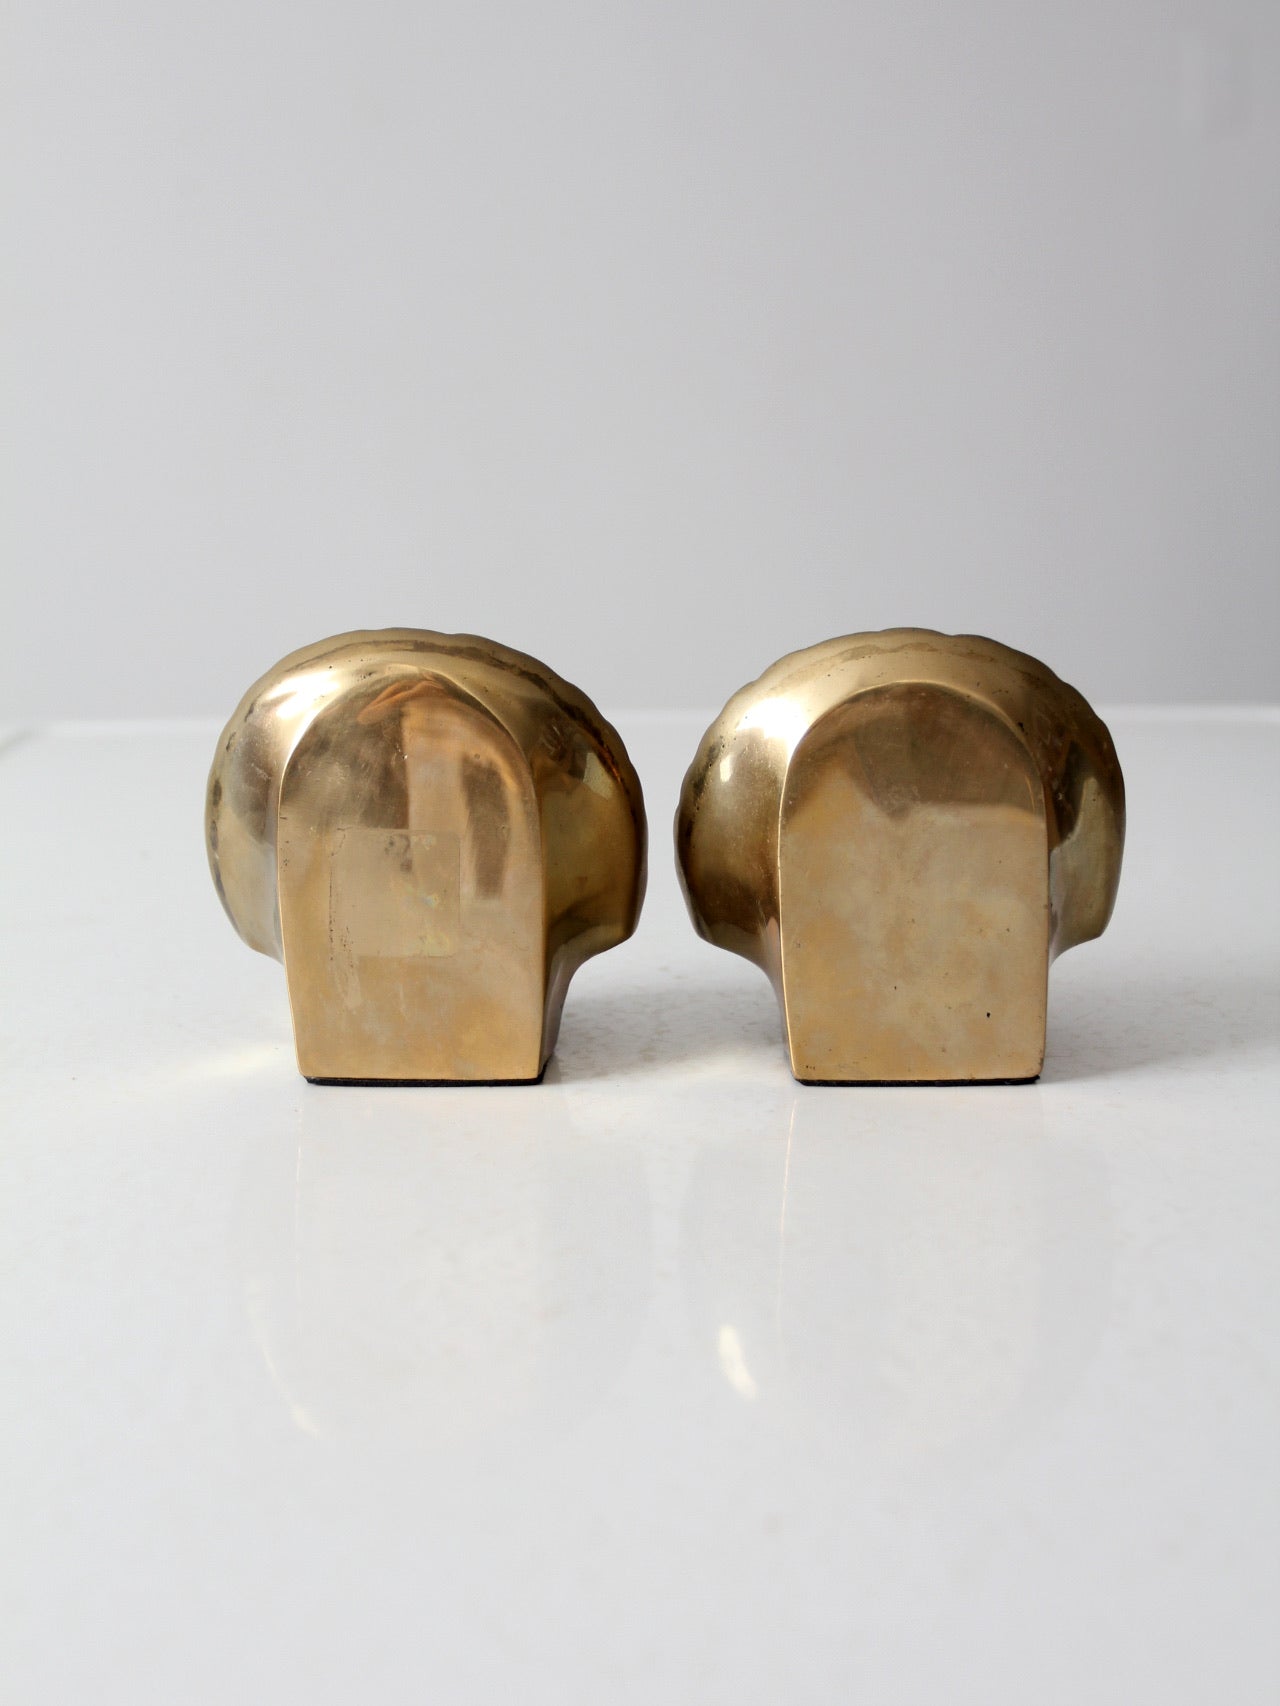 Vintage 80s Brass Seashell Bookends Beach Tropical Deco